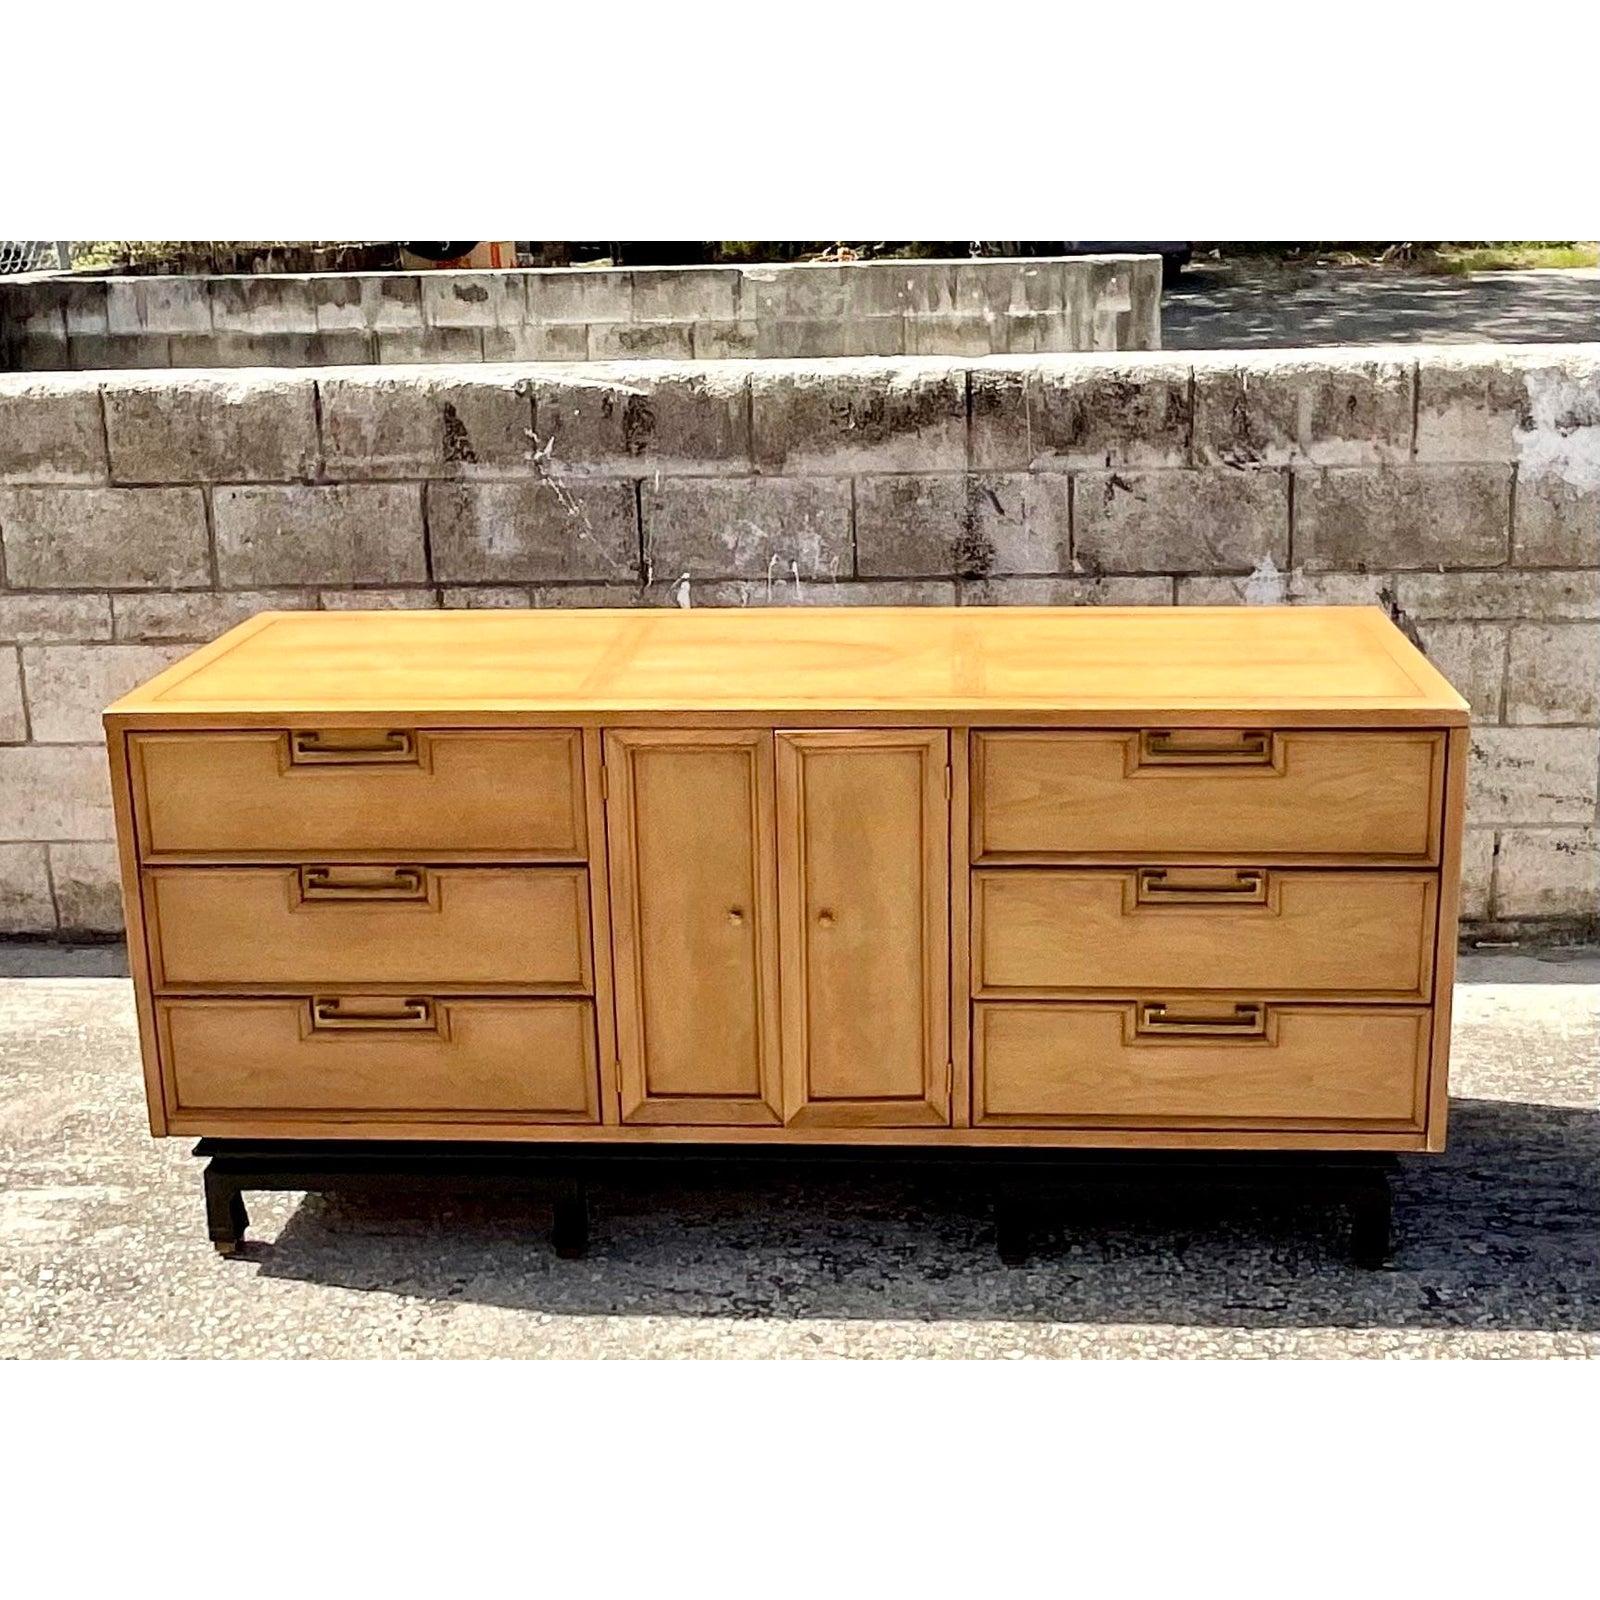 A fantastic vintage midcentury dresser. Made by the iconic American of Martinsville group. A chic bleached mahogany cabinet with brass hardware and raised apron plinth. Acquired from a Miami estate.